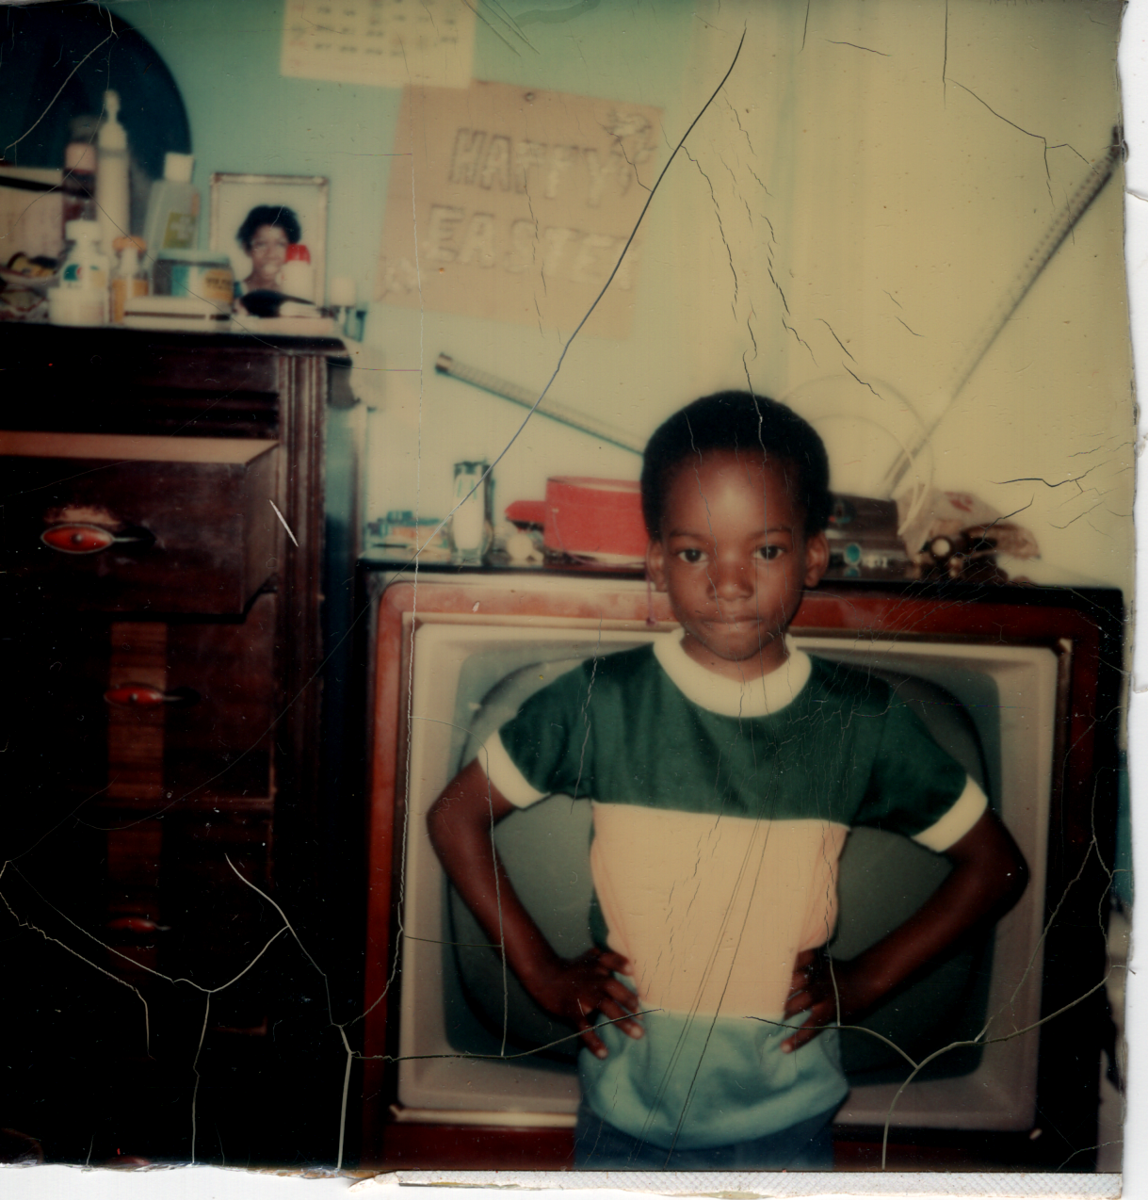 Melvin in front of a TV. He's about 6. Likely mid 70s.